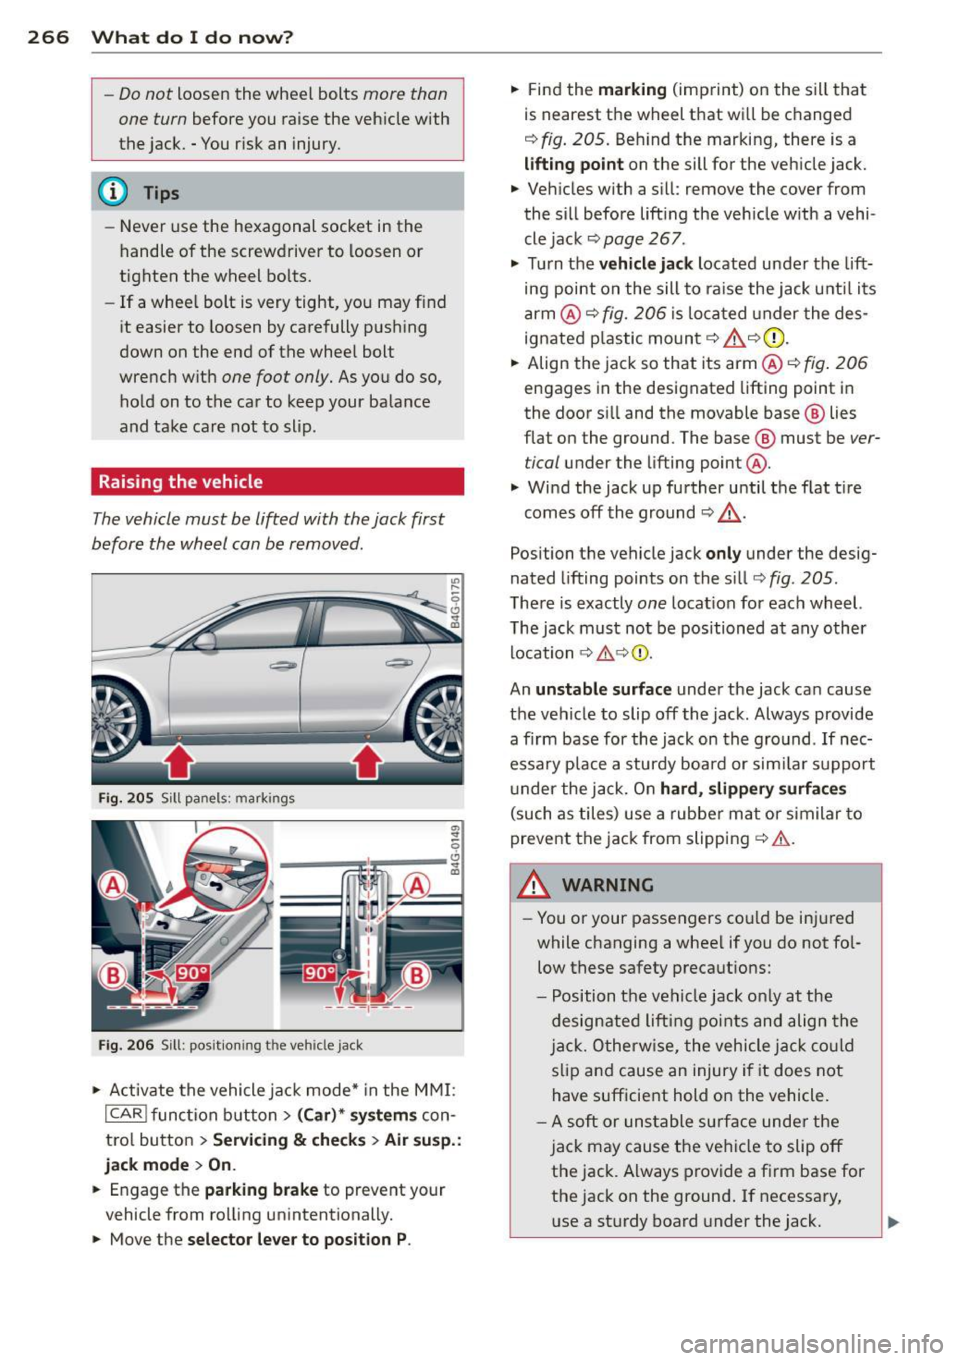 AUDI S6 2013  Owners Manual 266  What  do  I  do  n ow ? 
-Do not loosen  the  wheel  bolts more  than 
one  turn 
before  you  raise  the  veh icle  with 
the  jack.  -You risk an  injury . 
@ Tips 
-Never  use  the  hexagonal 